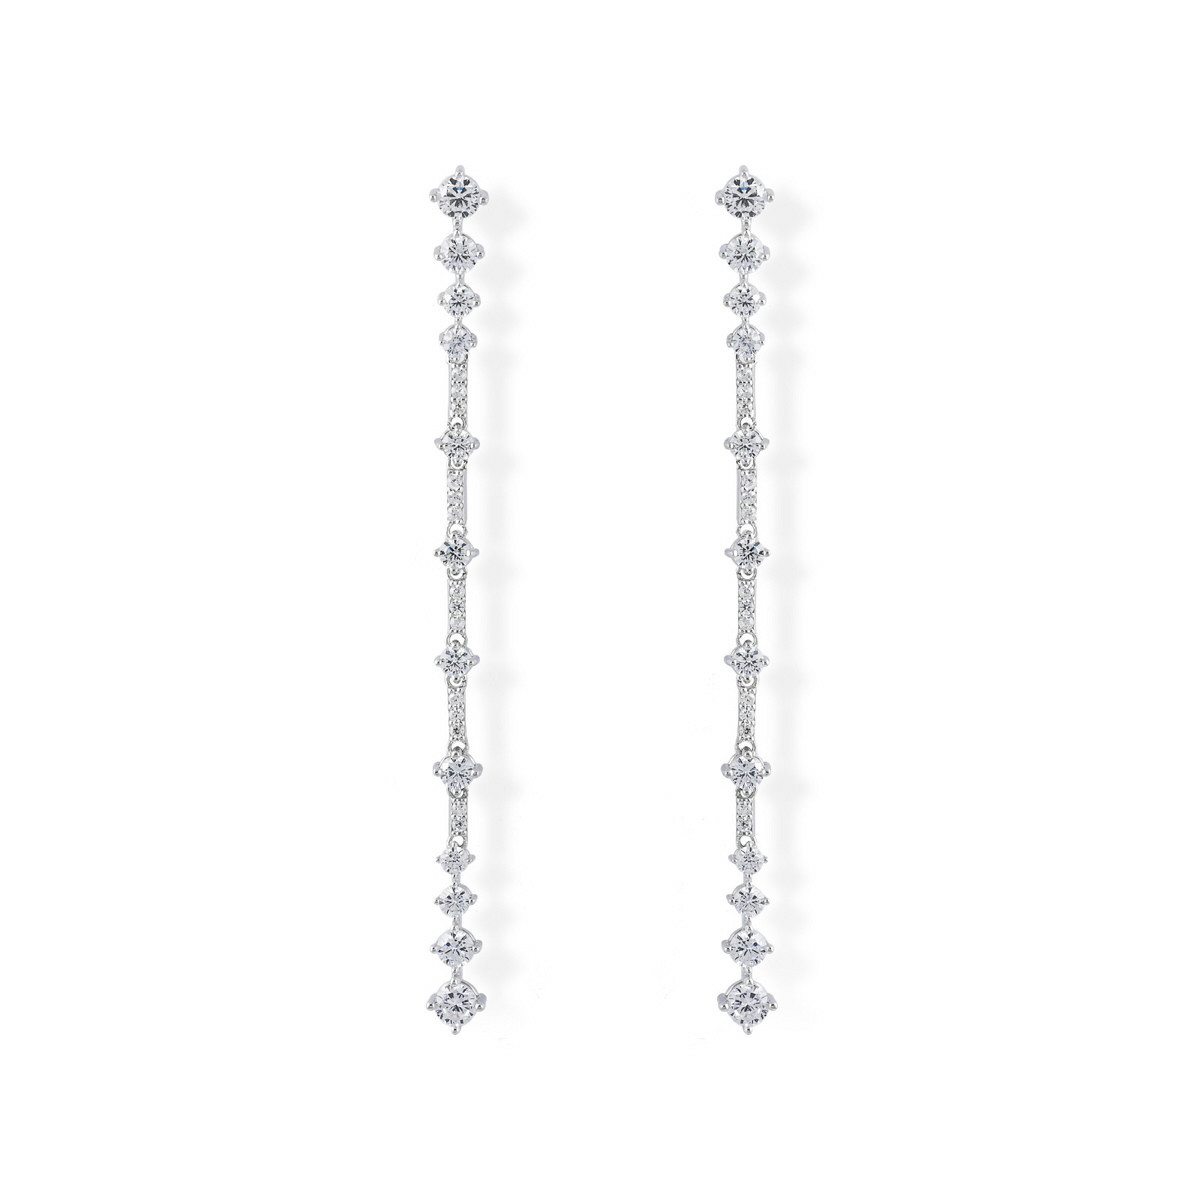 LONG ARTICULATED BRIDAL EARRINGS IN SILVER 90438PB